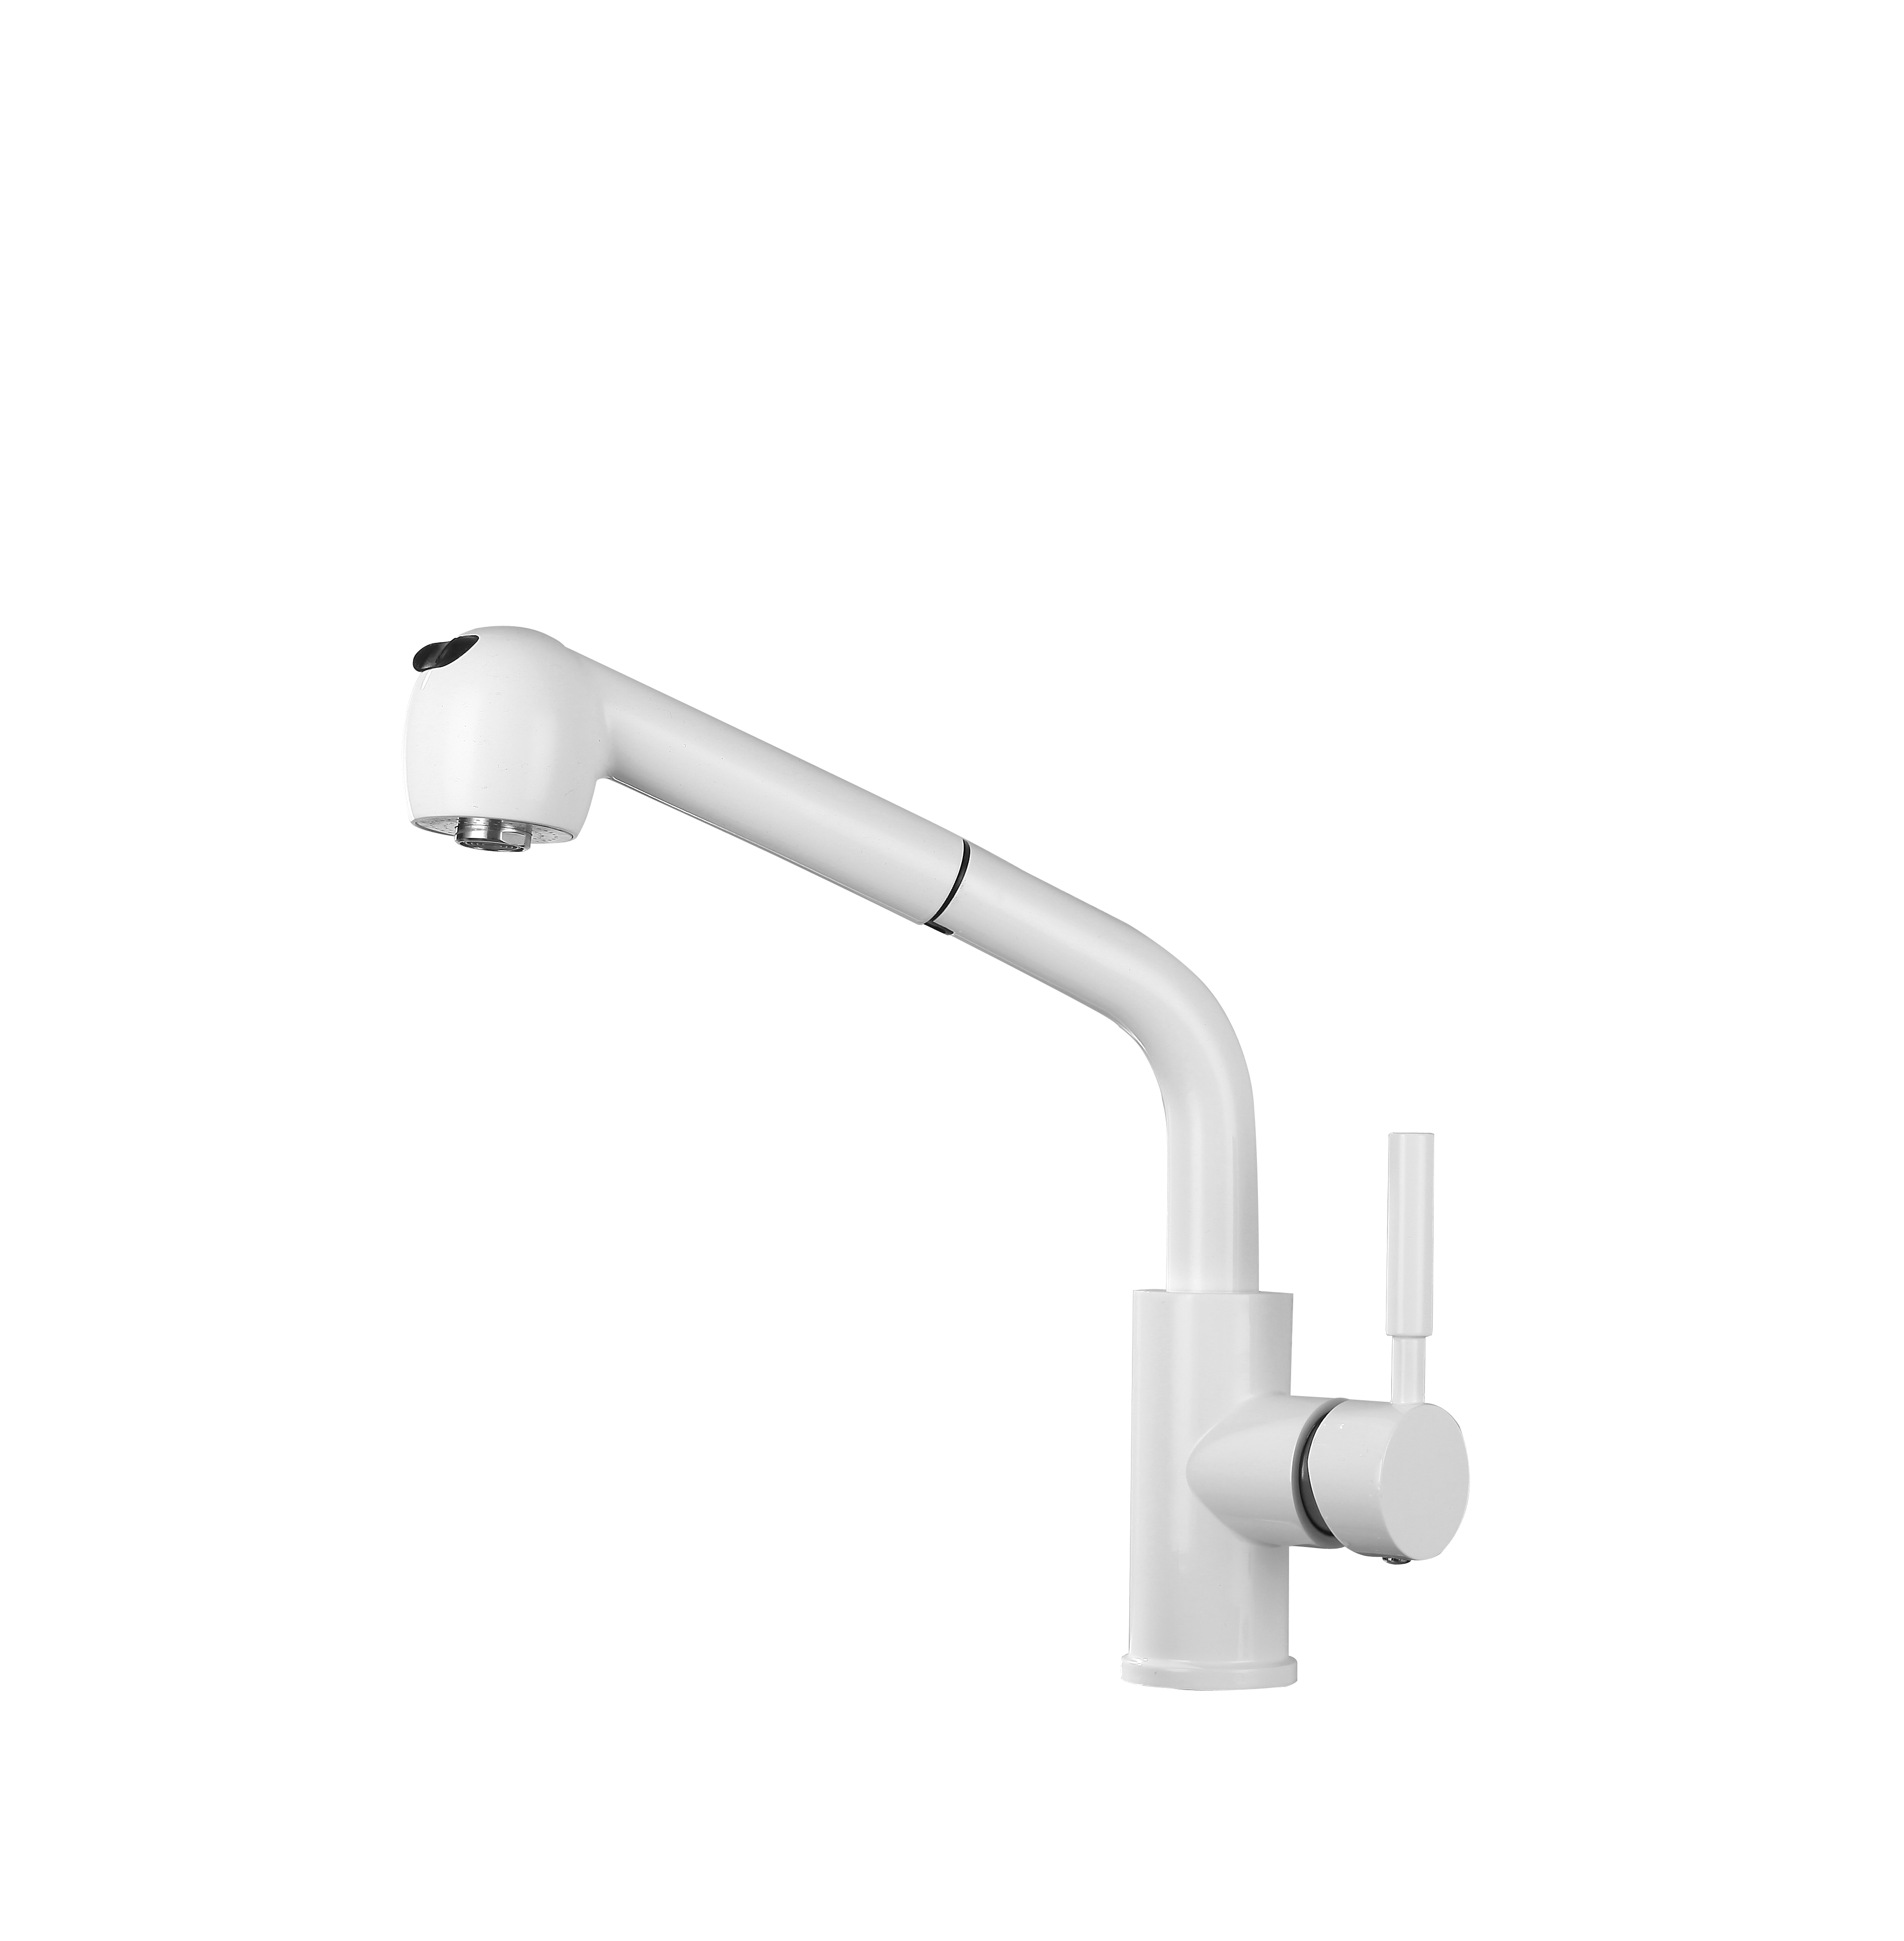 Hot Sales White Luxury Bifunctional Sink Contemporary Kitchen Faucets Pull Out Single Handle